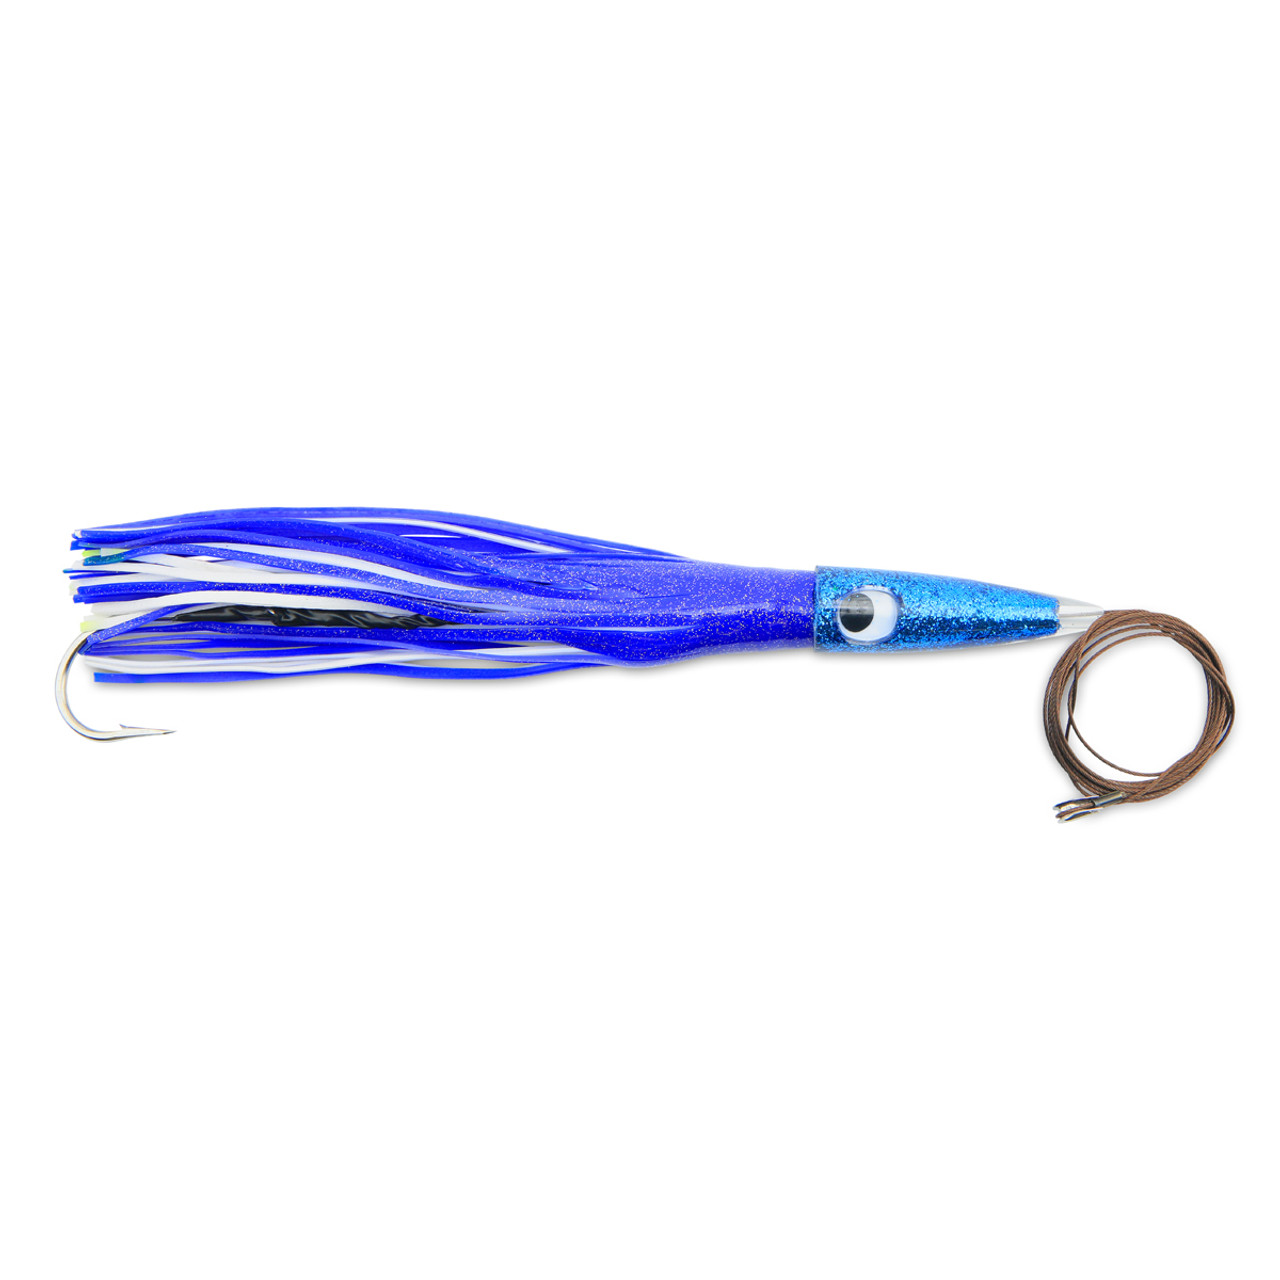 C&H Wahoo Whacker Lure - 11.5in - Blue/Pink